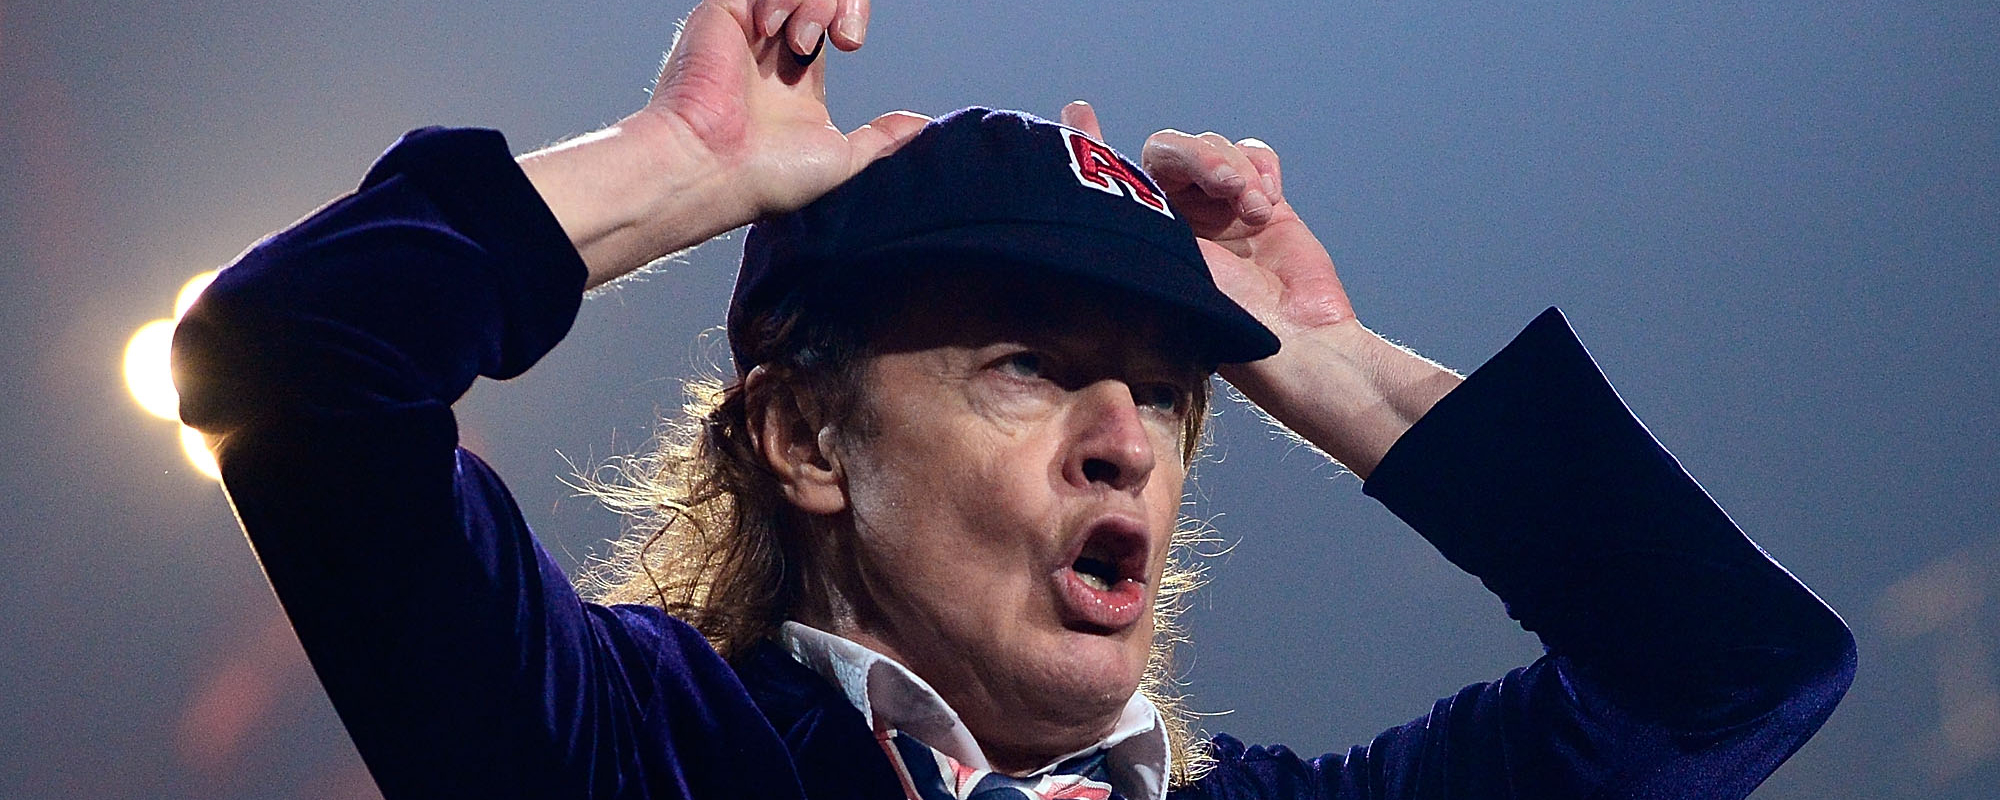 AC/DC Sells Staggering Amount of Tickets in One Day for Upcoming European Tour